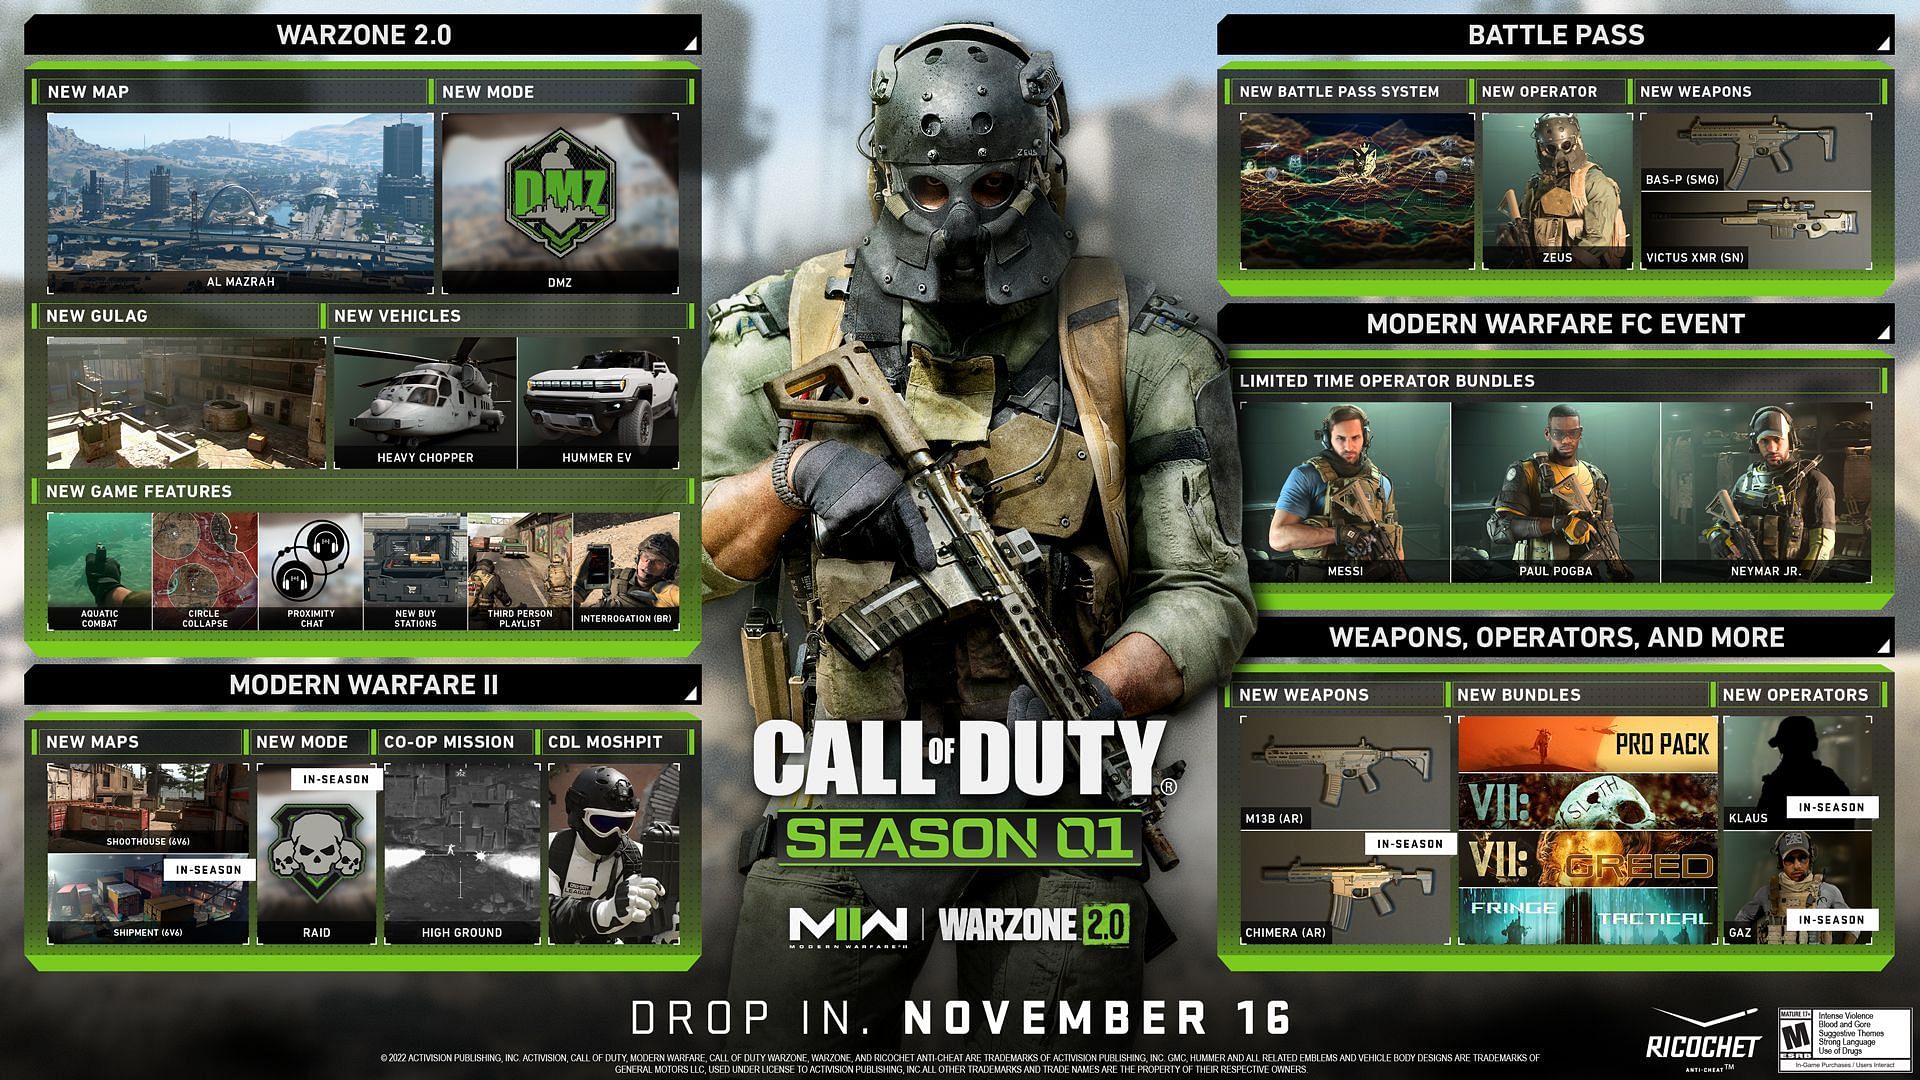 The roadmap for Season 1 of the game (Image via Activision)